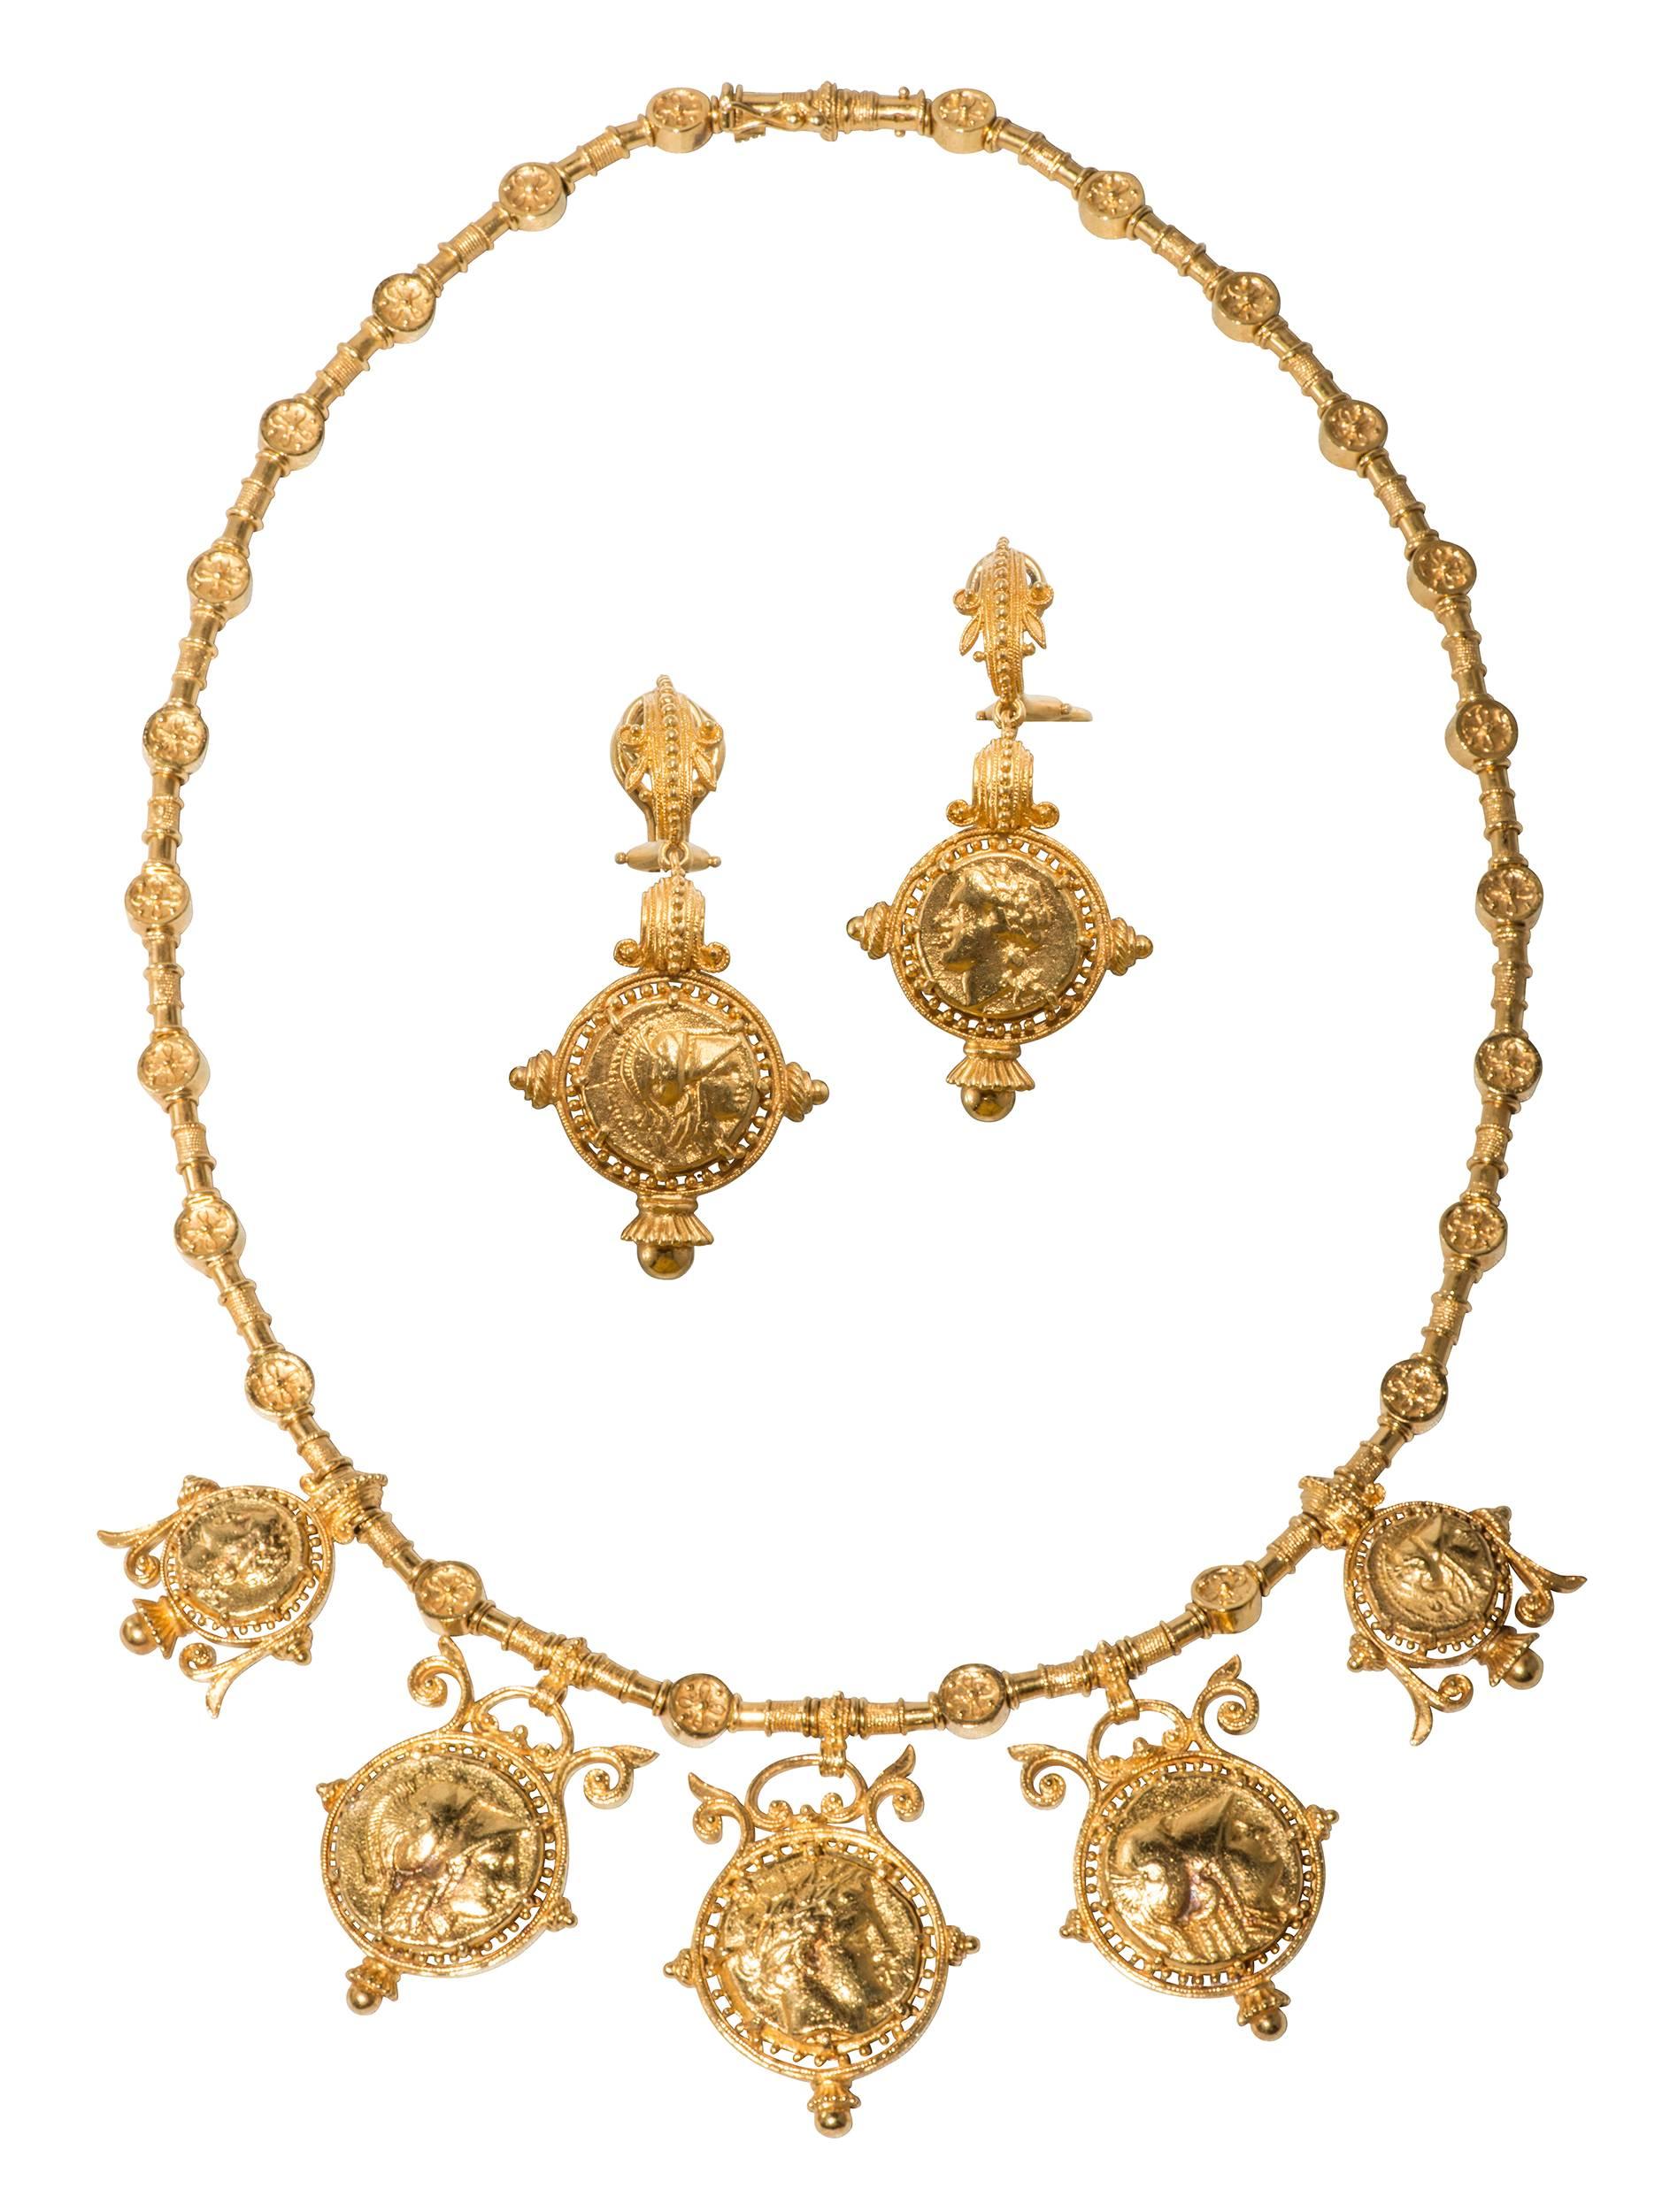 Etruscan Style Coin Necklace and Earrings by Julius Cohen 5